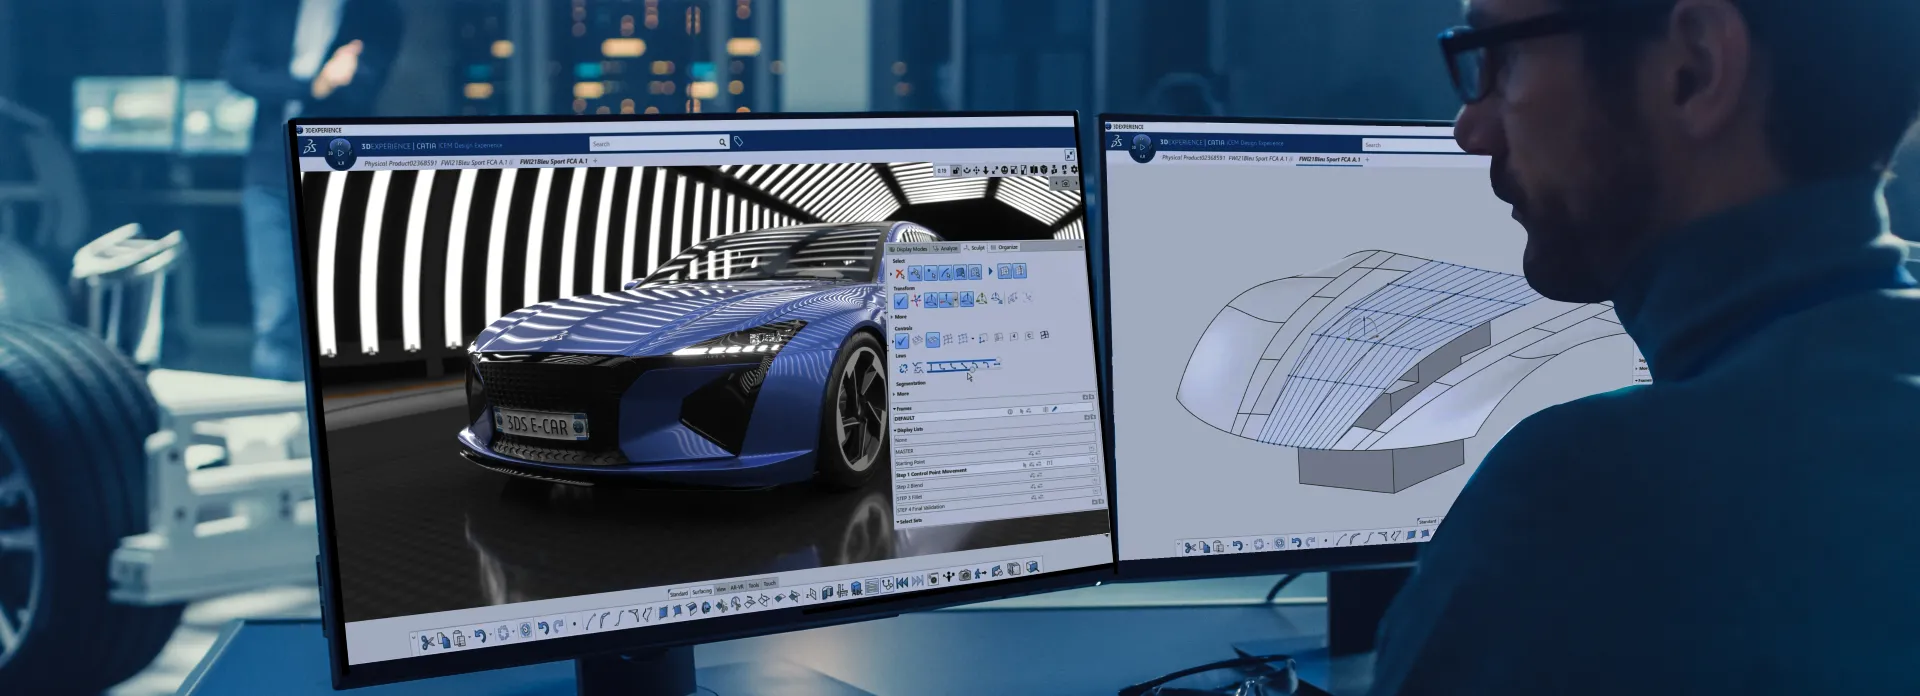 CATIA Surface Refinement > Dassault Systemes